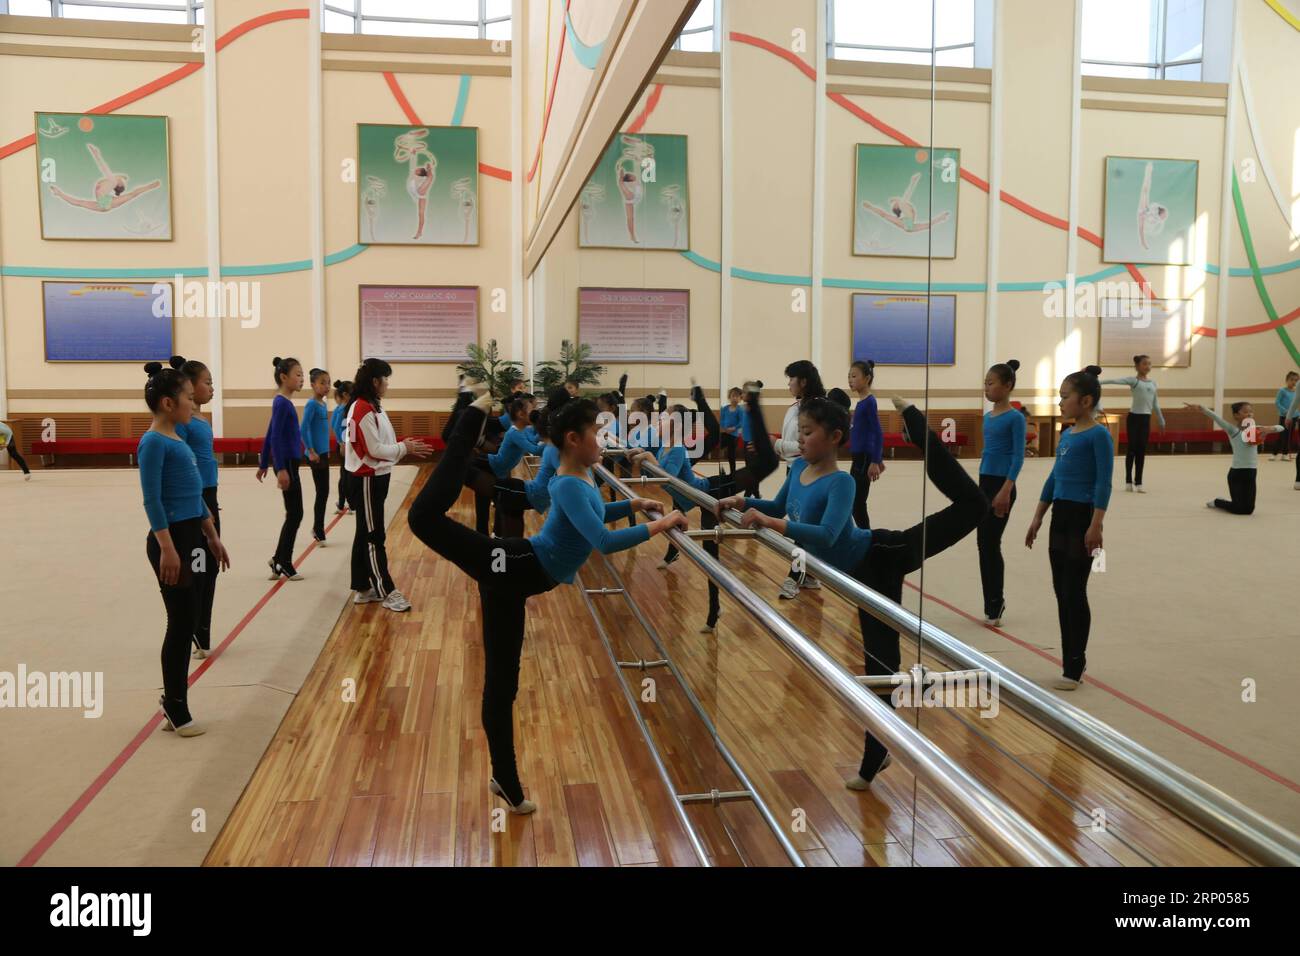 (180420) -- PYONGYANG, April 20, 2018 -- Students of the rhythmic gymnastics group exercise at the Mangyongdae Schoolchildren s Palace on the western outskirts of Pyongyang, capital of the Democratic People s Republic of Korea (DPRK), on April 19, 2018. ) DPRK-PYONGYANG-MANGYONGDAE SCHOOLCHILDREN S PALACE ChengxDayu PUBLICATIONxNOTxINxCHN Stock Photo